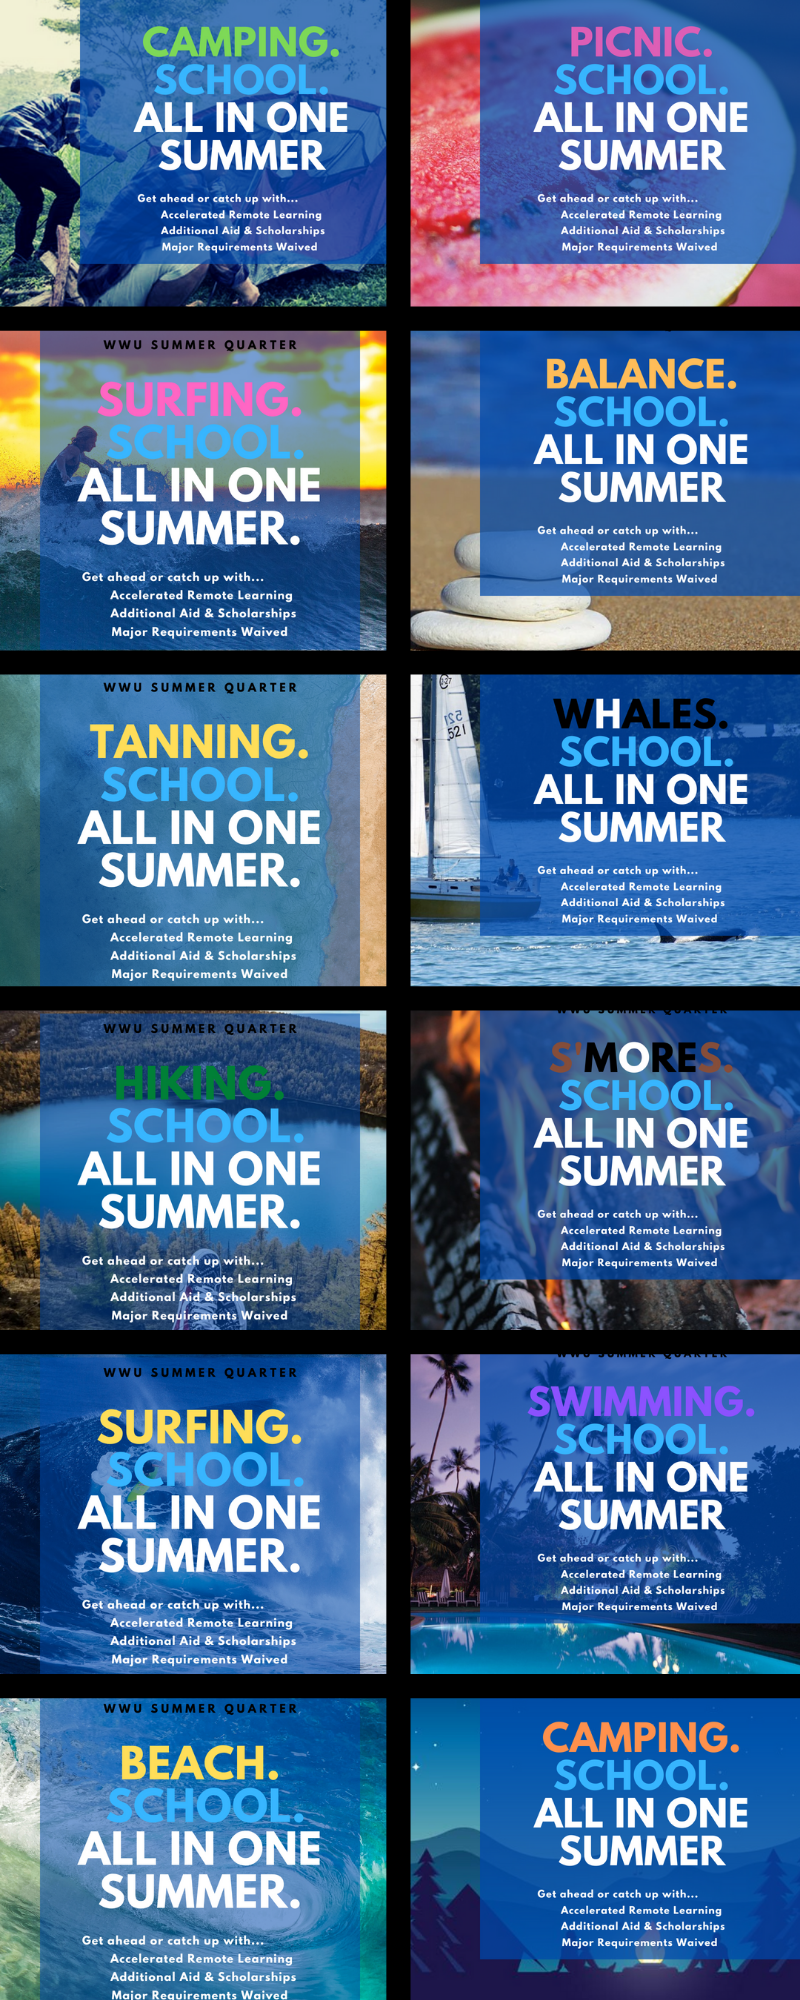 Collection of advertisements for Western's summer program